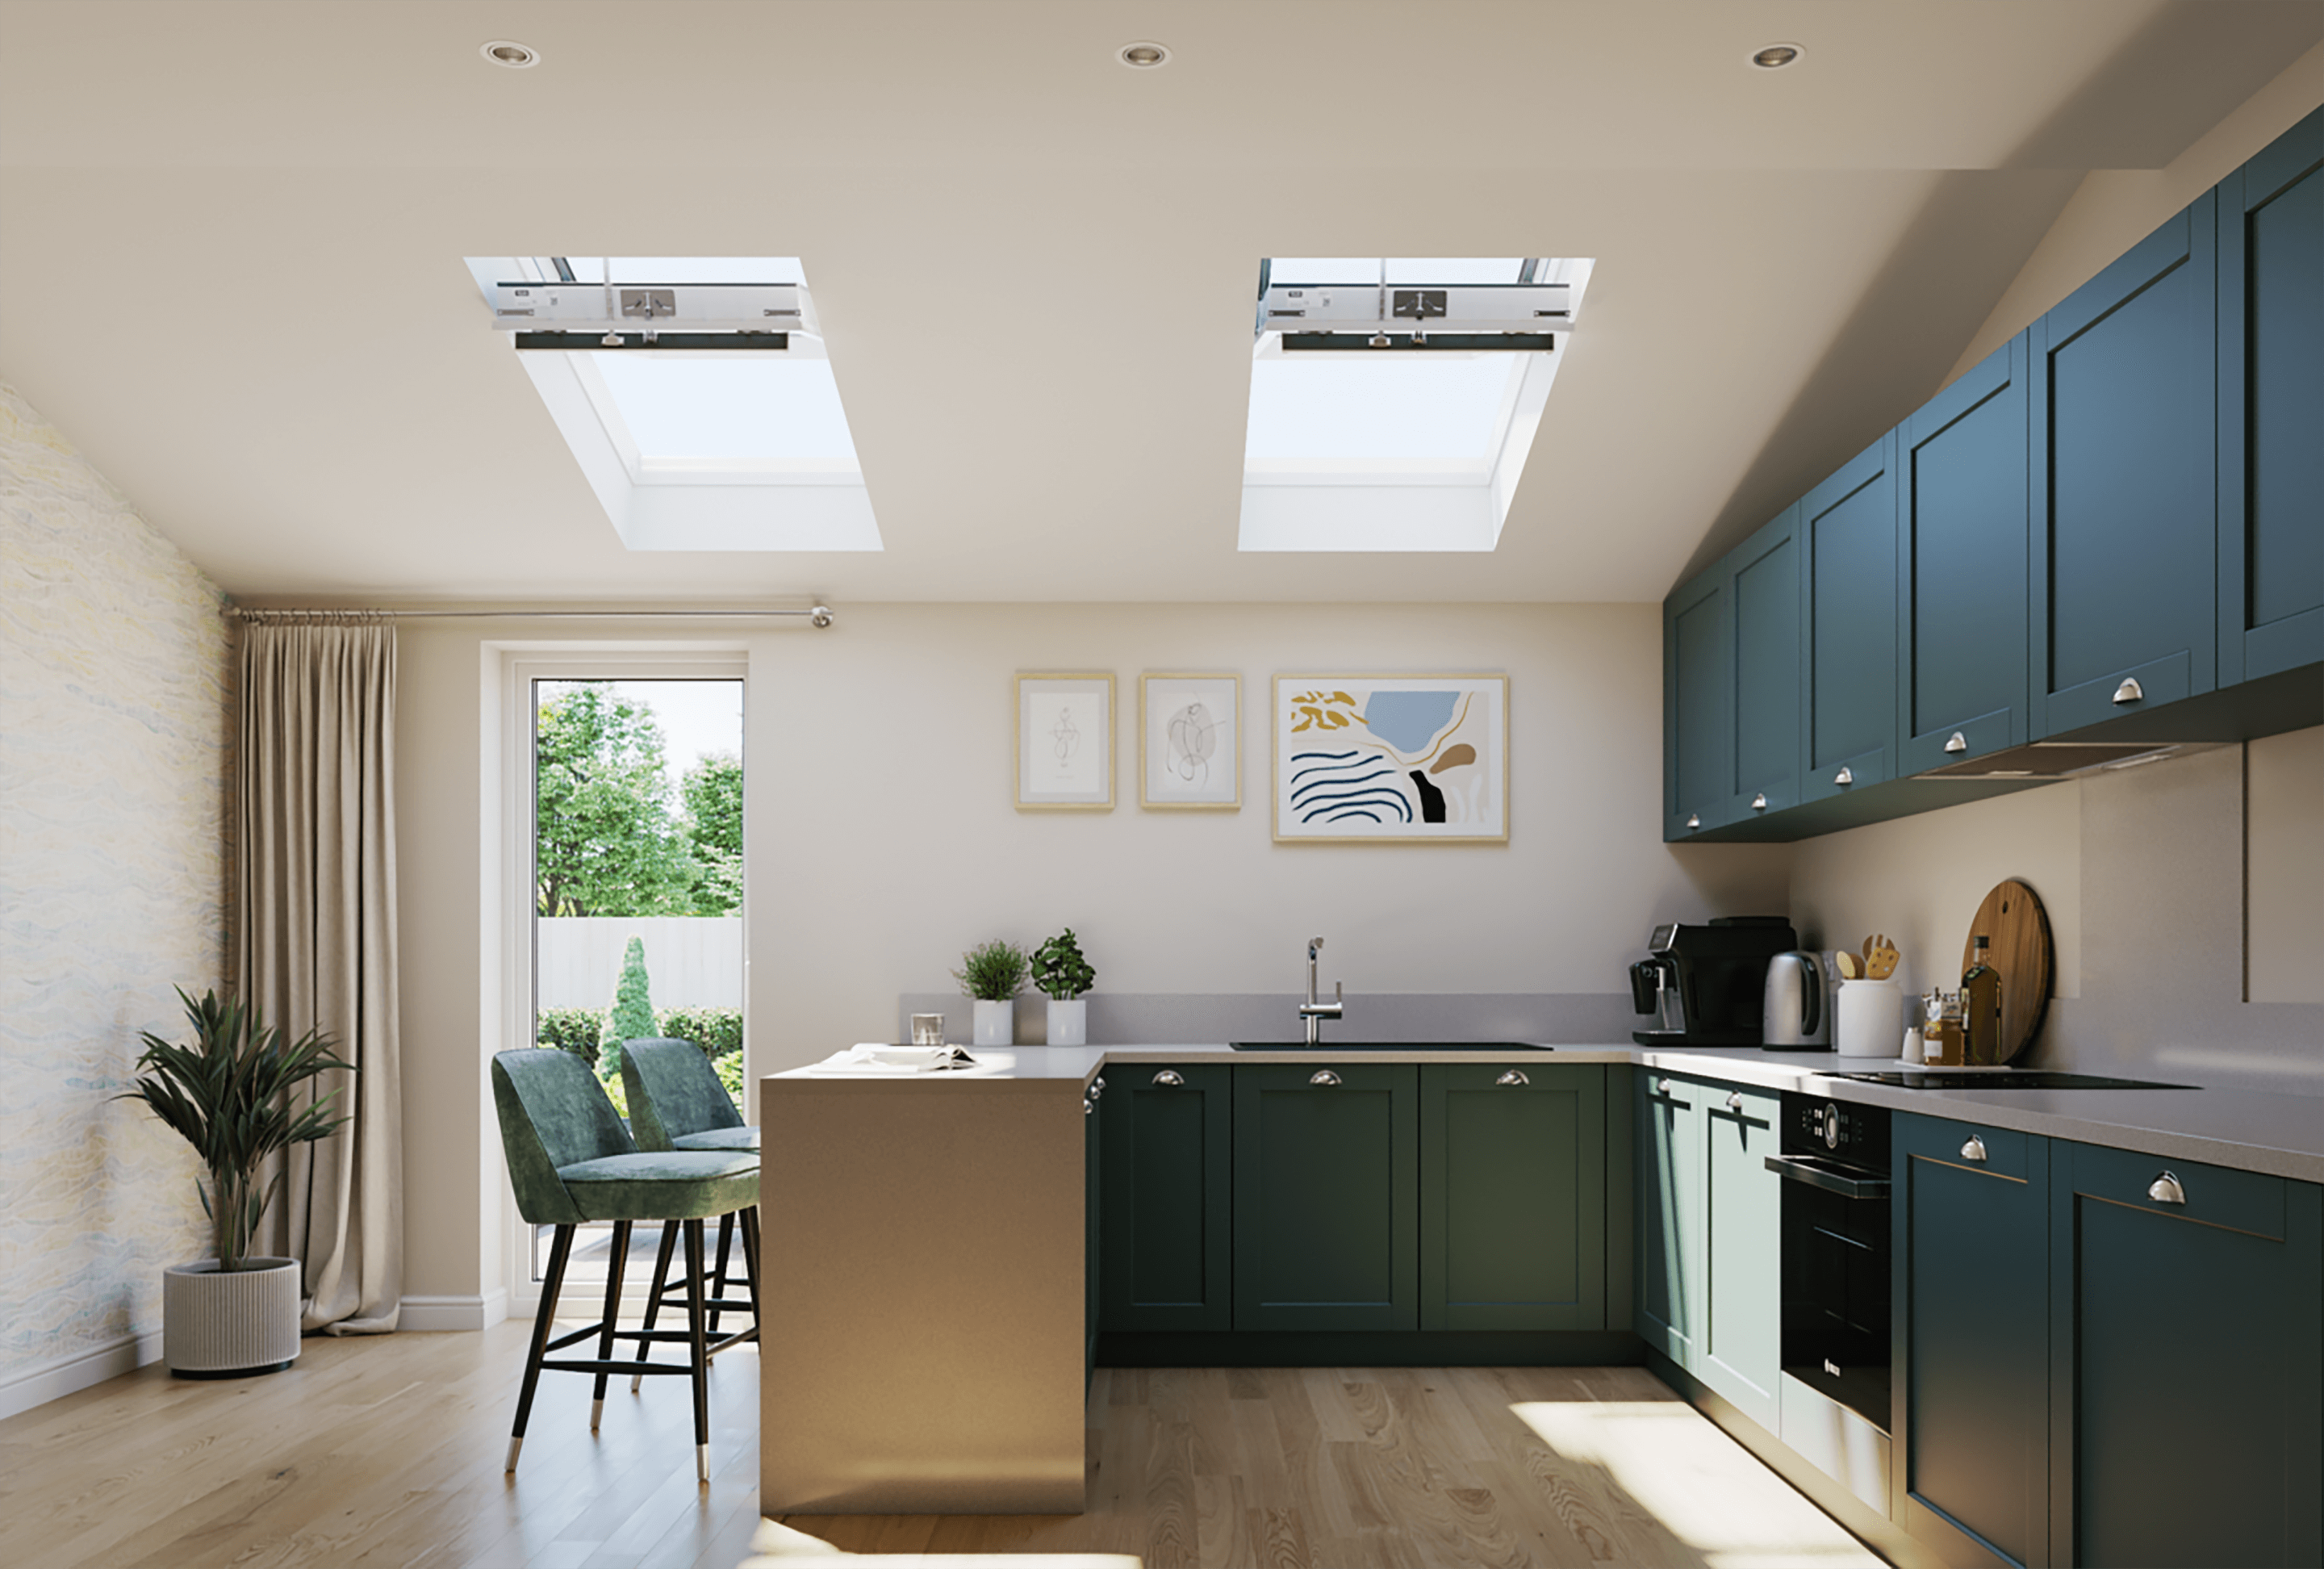 A kitchen with two flat roof windows in the ceiling